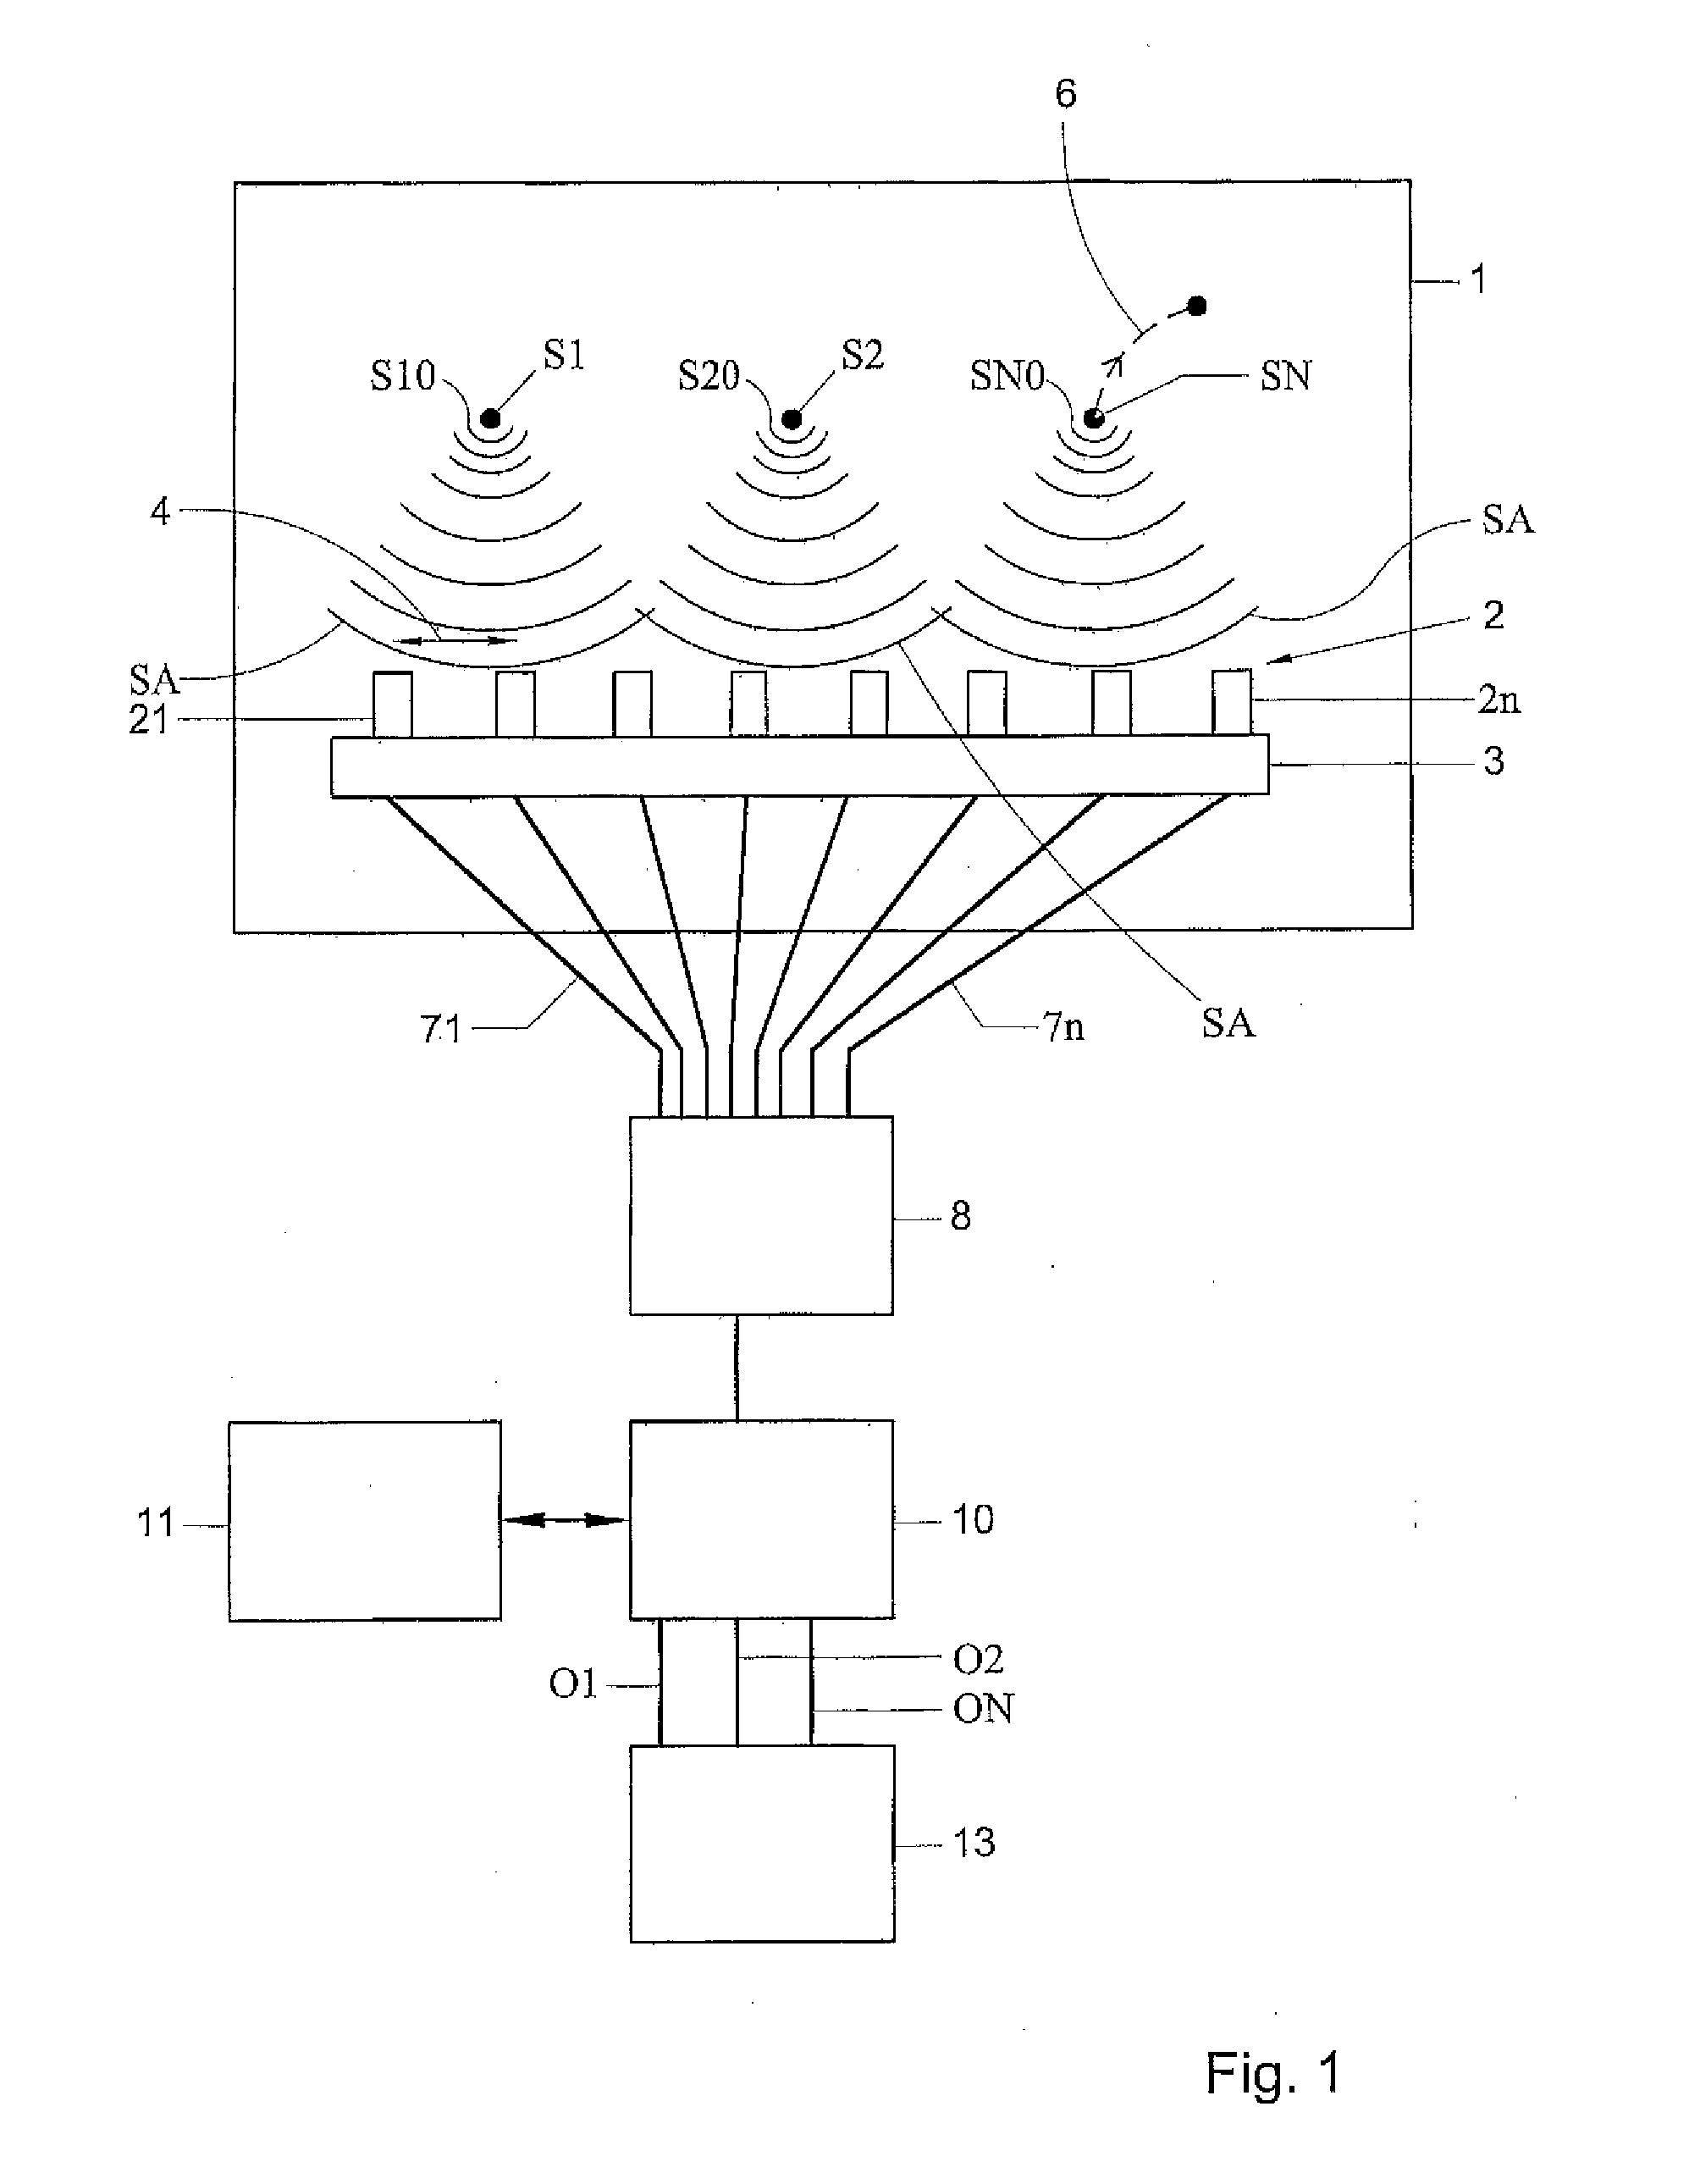 System and method for extracting acoustic signals from signals emitted by a plurality of sources